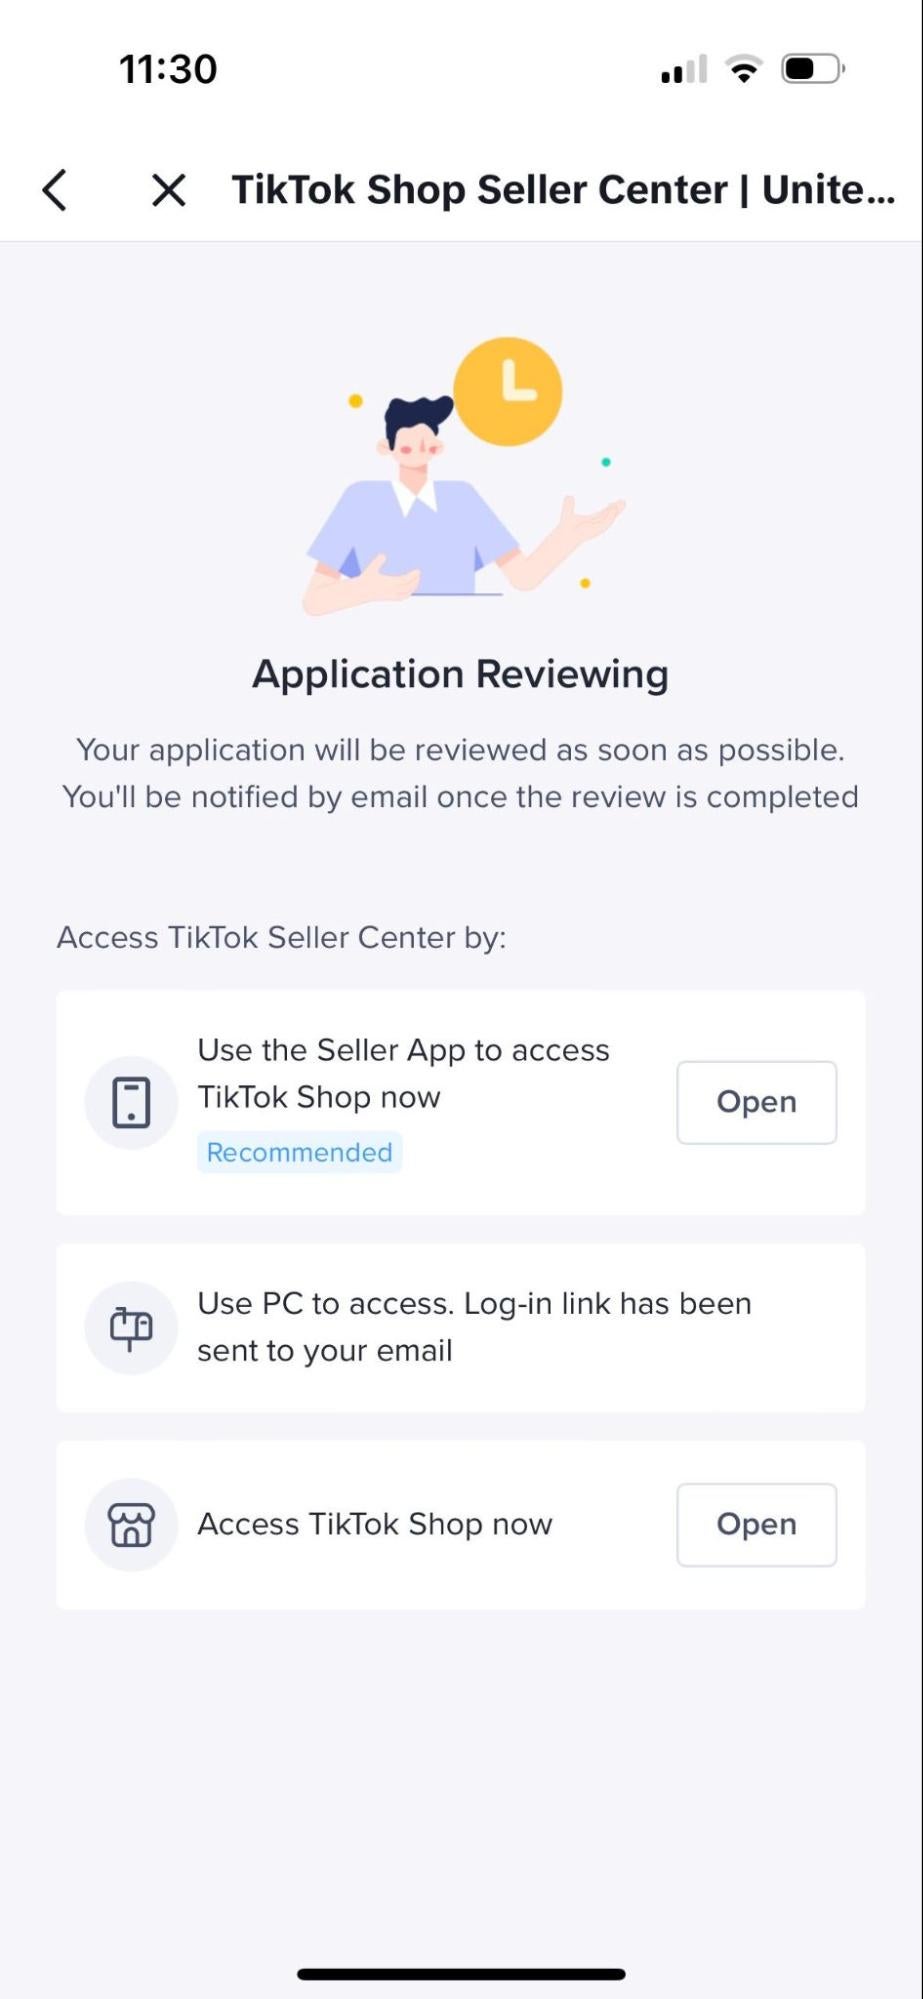 Becoming a TikTok Shop Seller: Requirements and FAQs